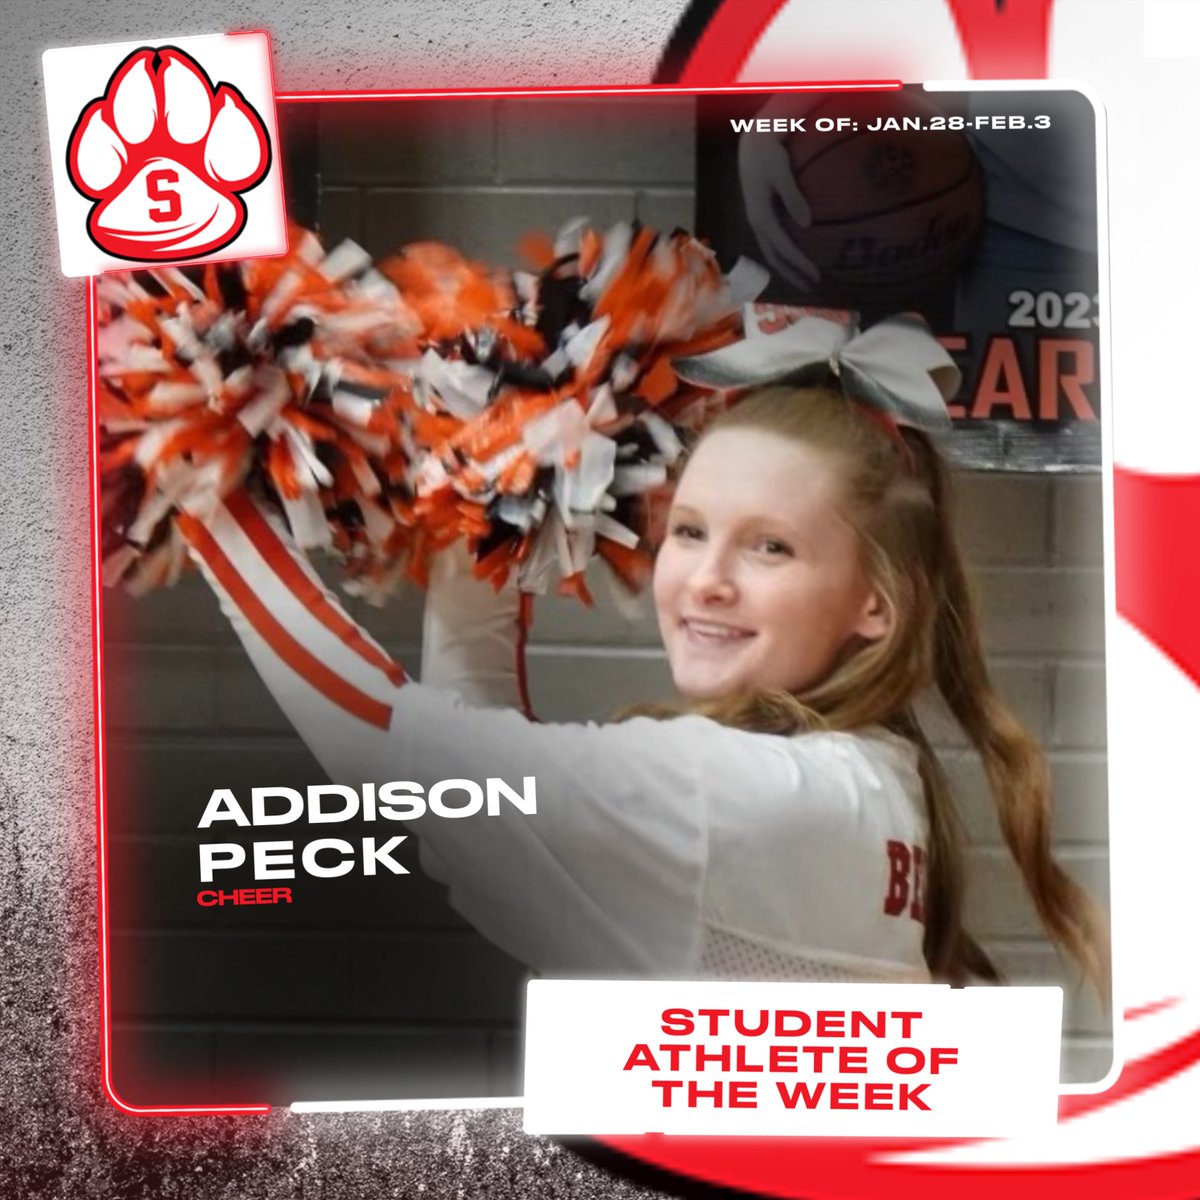 Congrats to our STUDENT ATHLETE OF THE WEEK for the week of January 28- February 3! Way to represent SHS! #BearcatPride